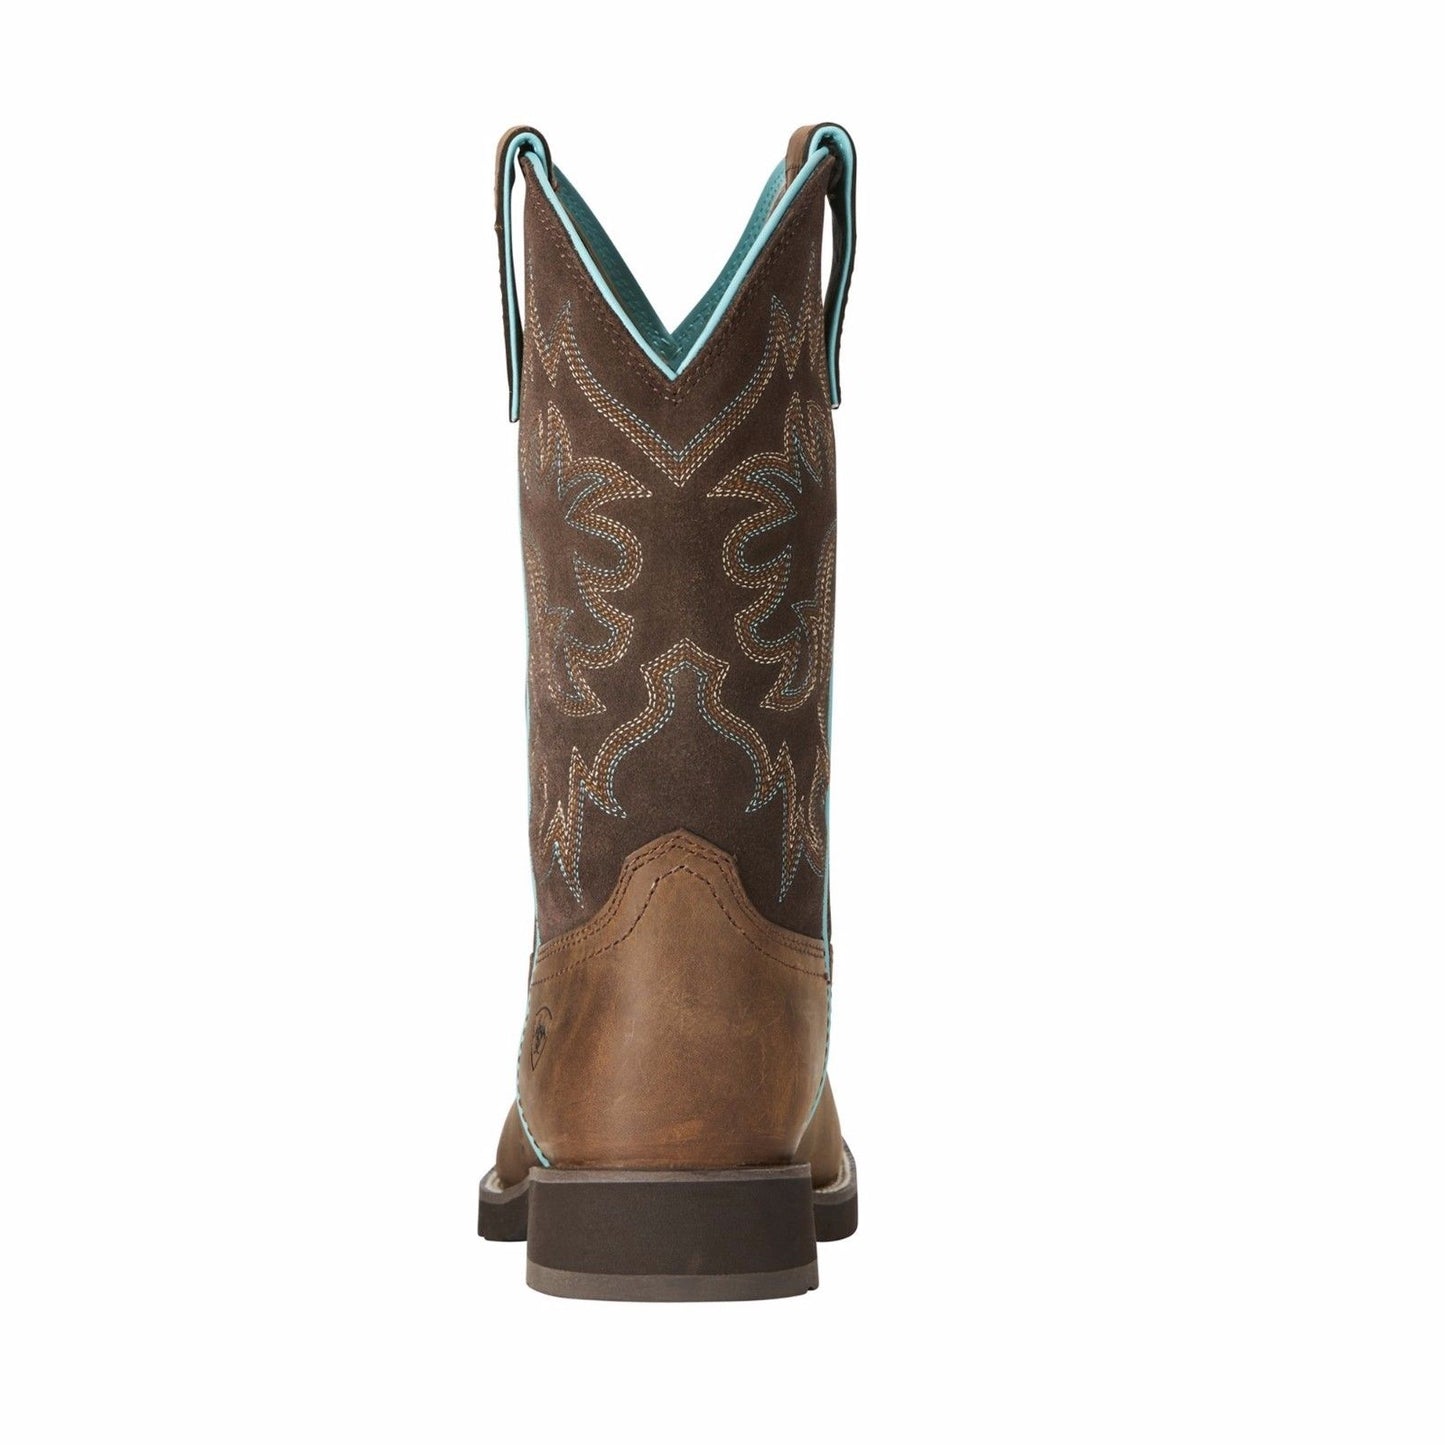 Ariat Ladies Delilah Round Toe Distressed Brown Boots 10021457 - Wild West Boot Store